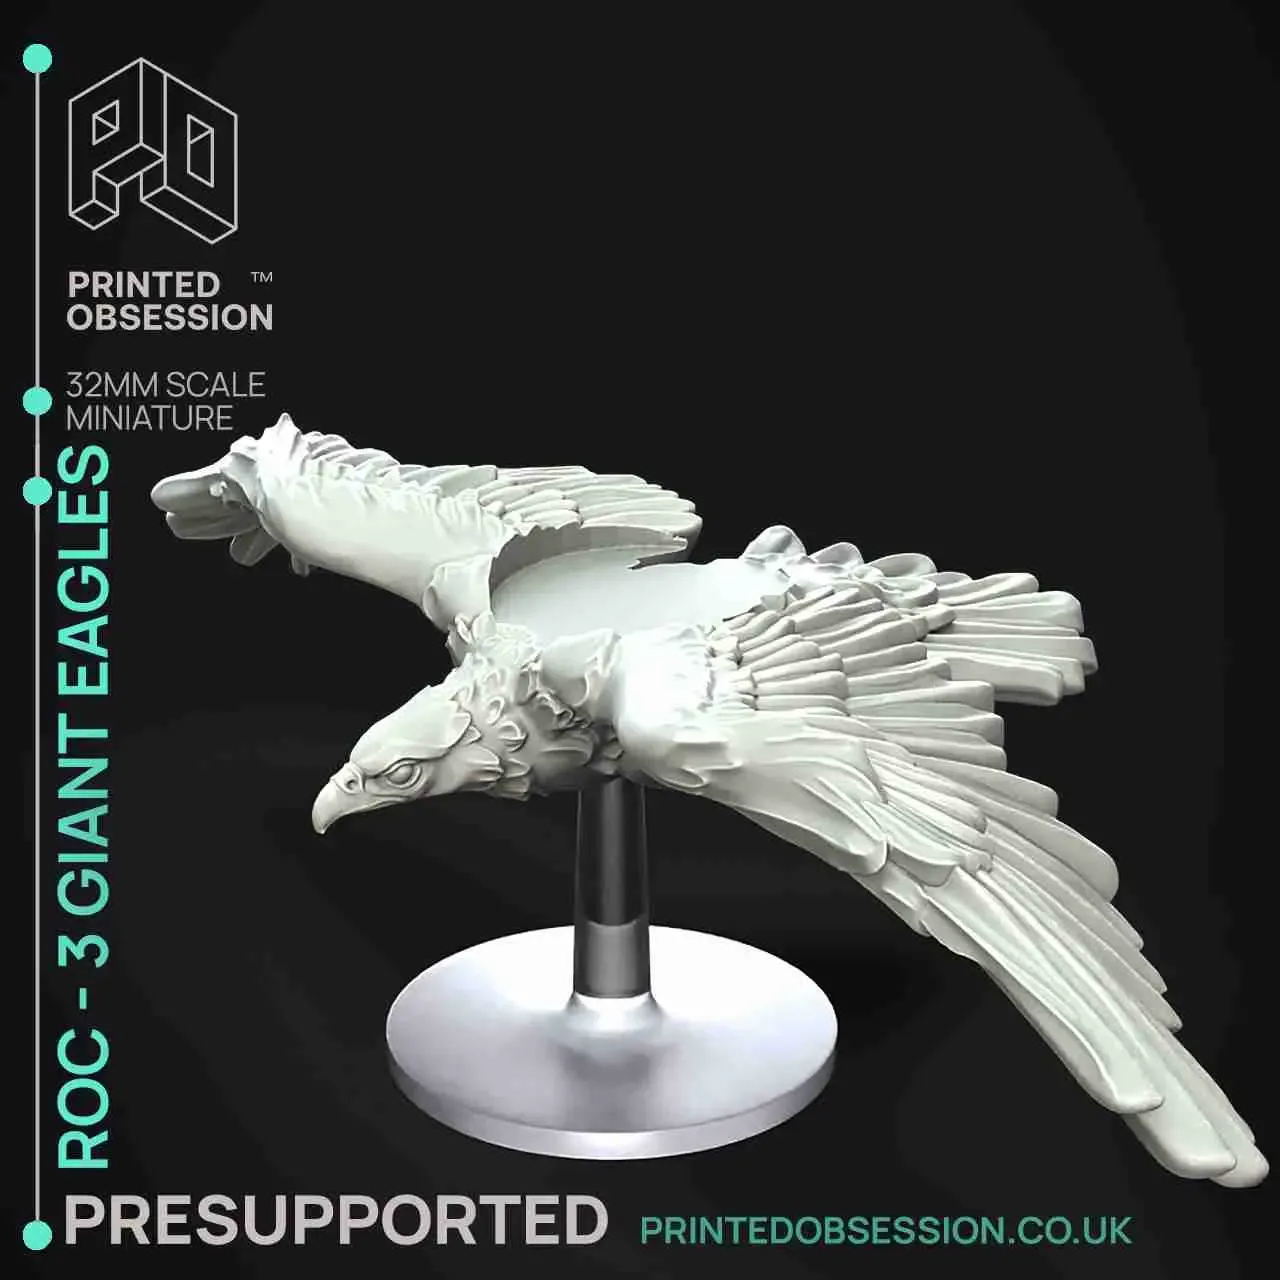 Roc - 3 Giant Eagles - PRESUPPORTED - 32mm scale